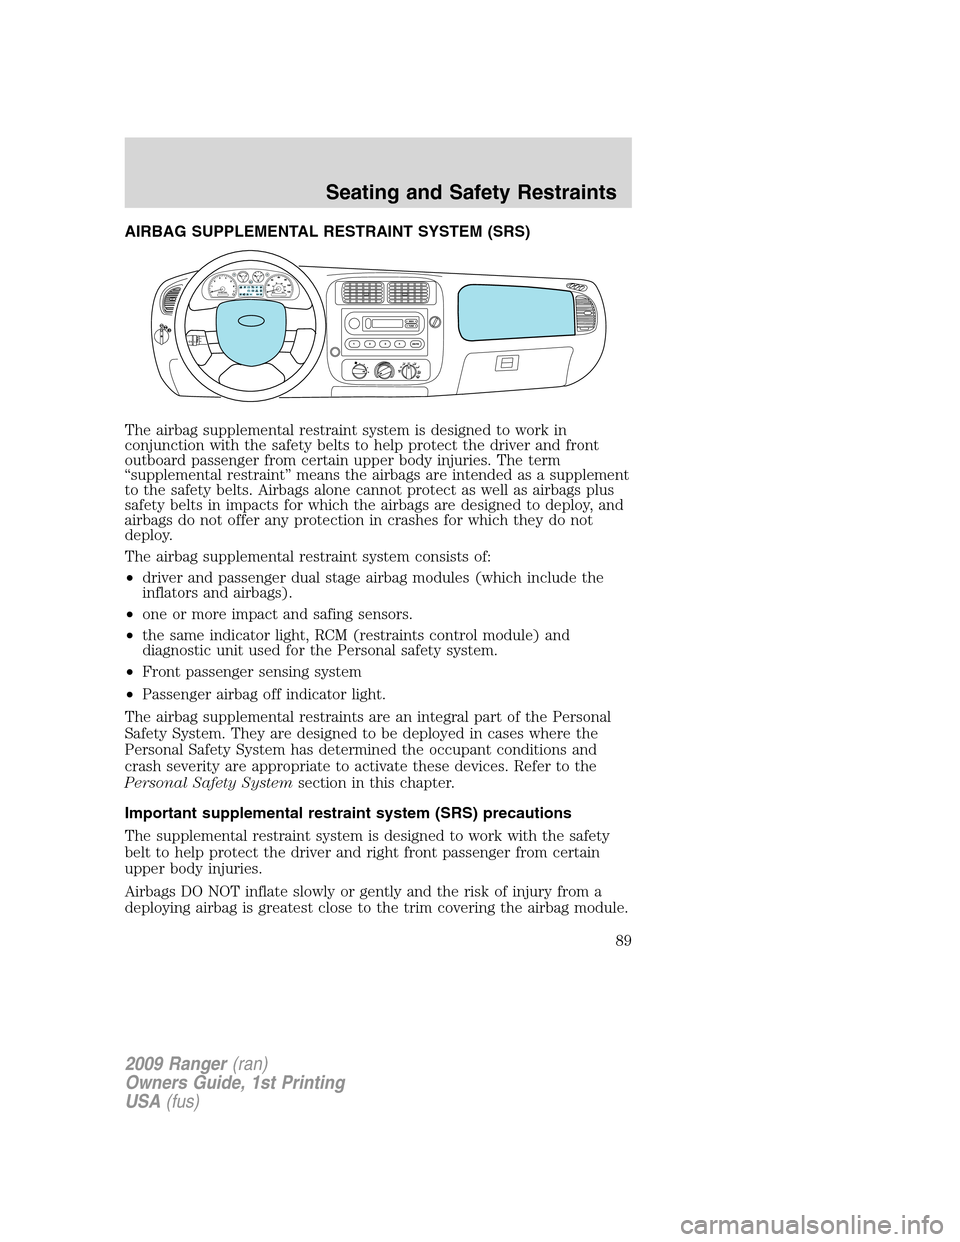 FORD RANGER 2009 2.G Owners Manual AIRBAG SUPPLEMENTAL RESTRAINT SYSTEM (SRS)
The airbag supplemental restraint system is designed to work in
conjunction with the safety belts to help protect the driver and front
outboard passenger fro